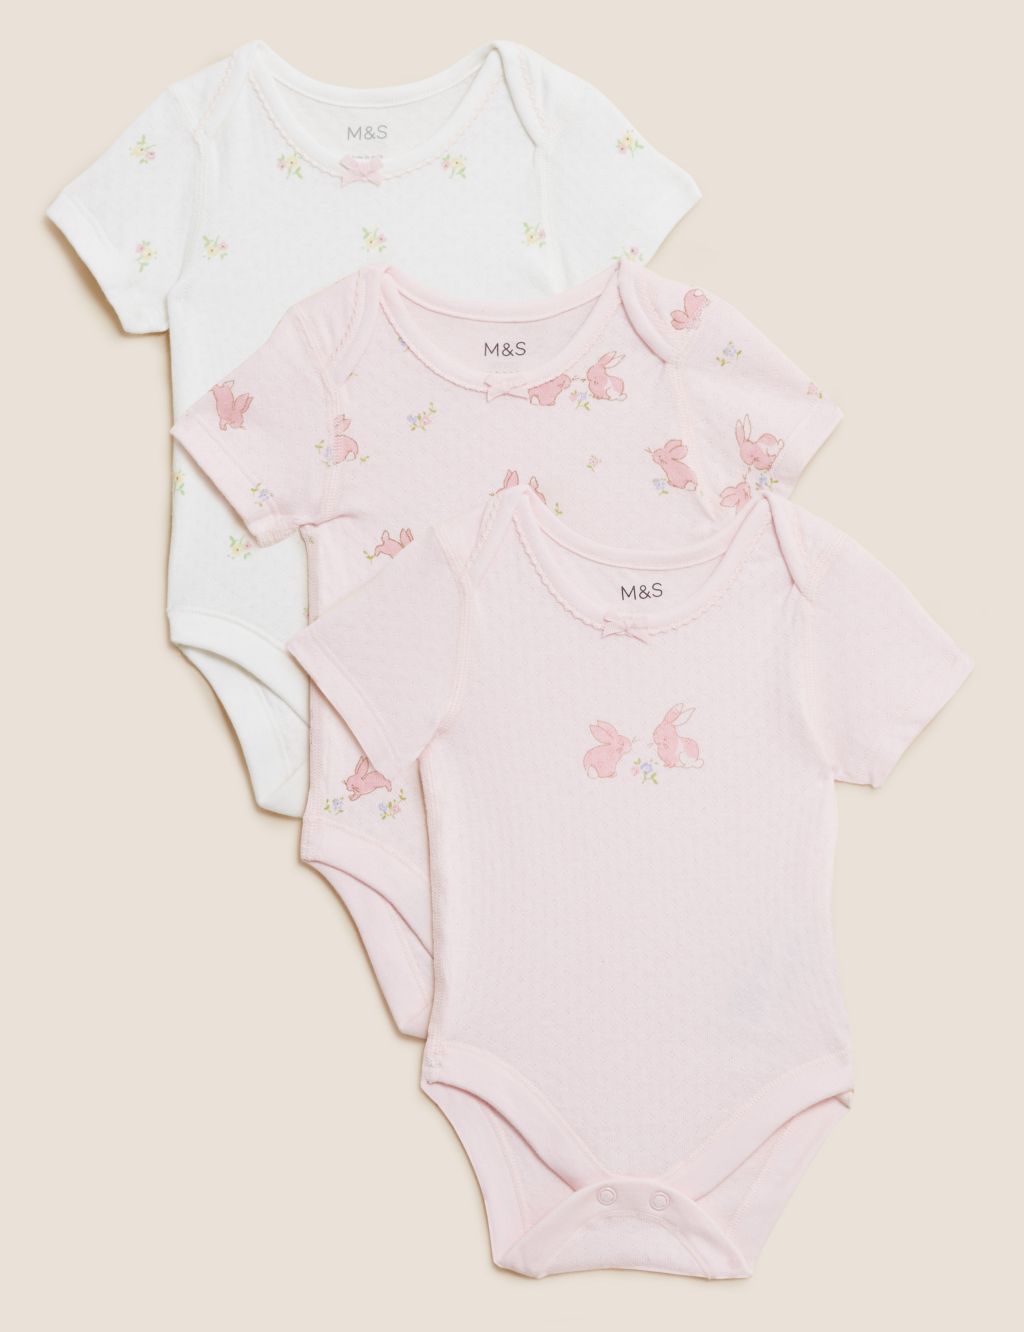 3pk Pure Cotton Patterned Bodysuits (61/2 lbs - 3 Yrs) image 1